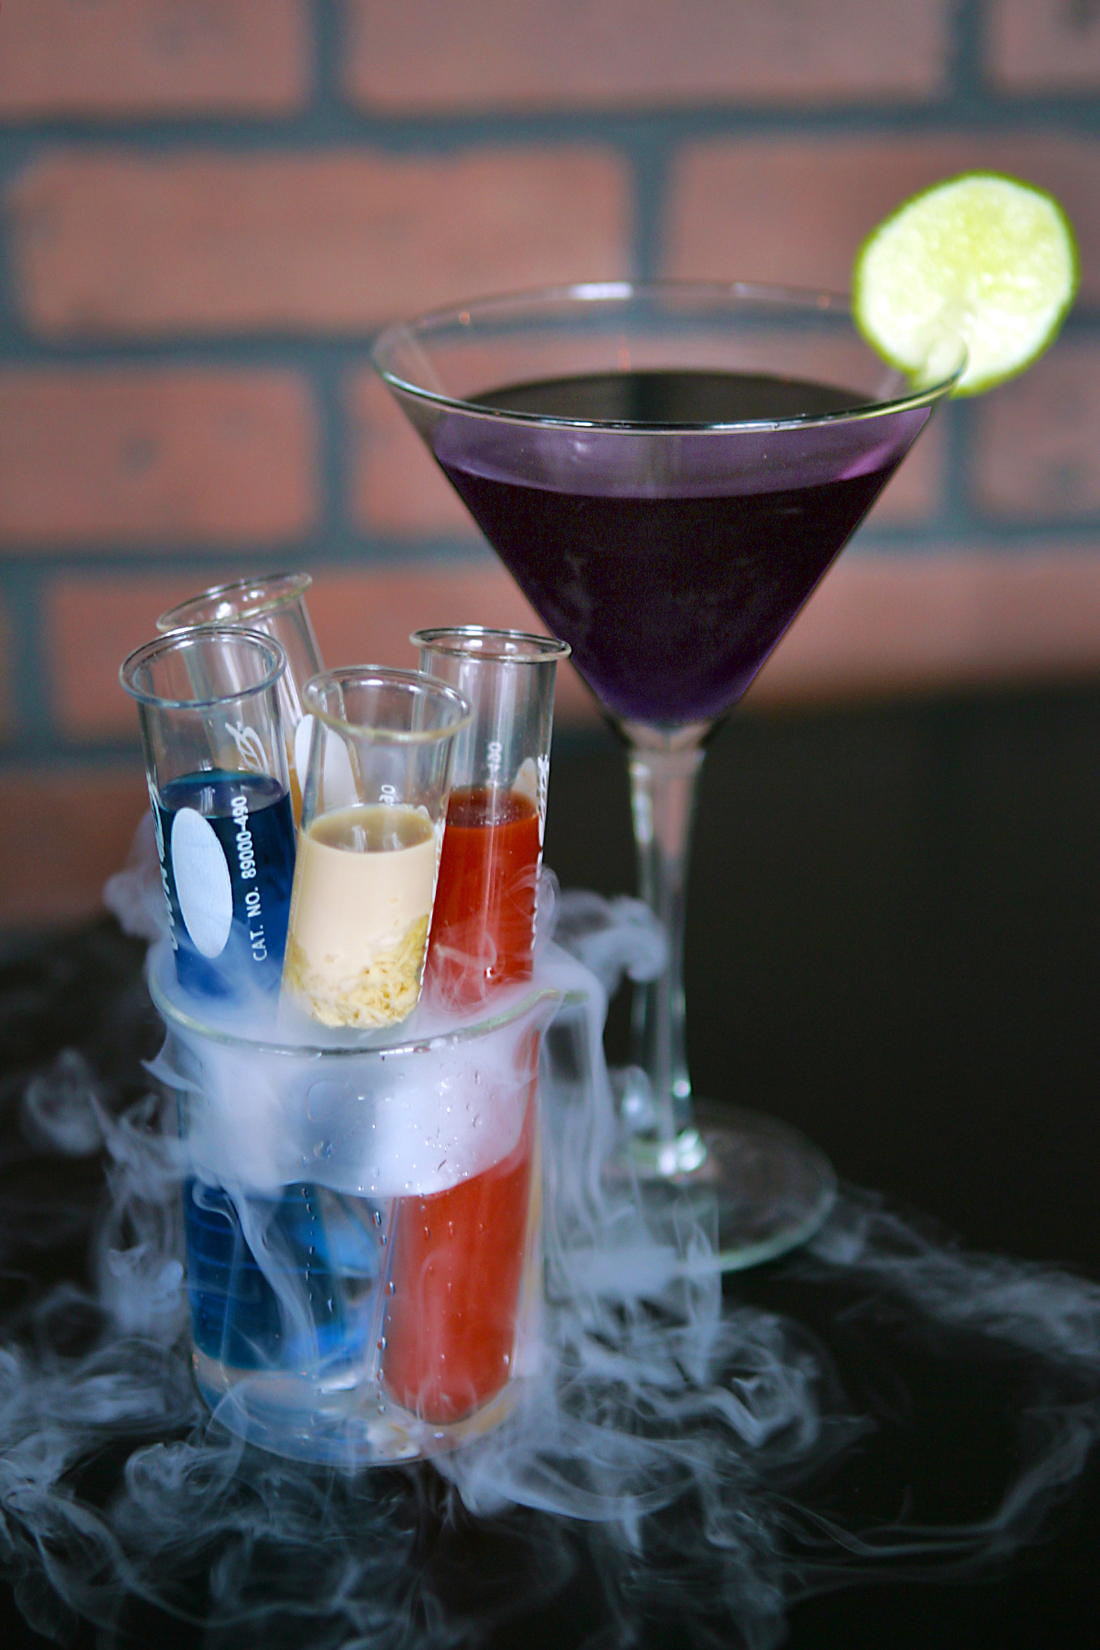 The Lab Rack, a flight of shots, is served in a smoking beaker.